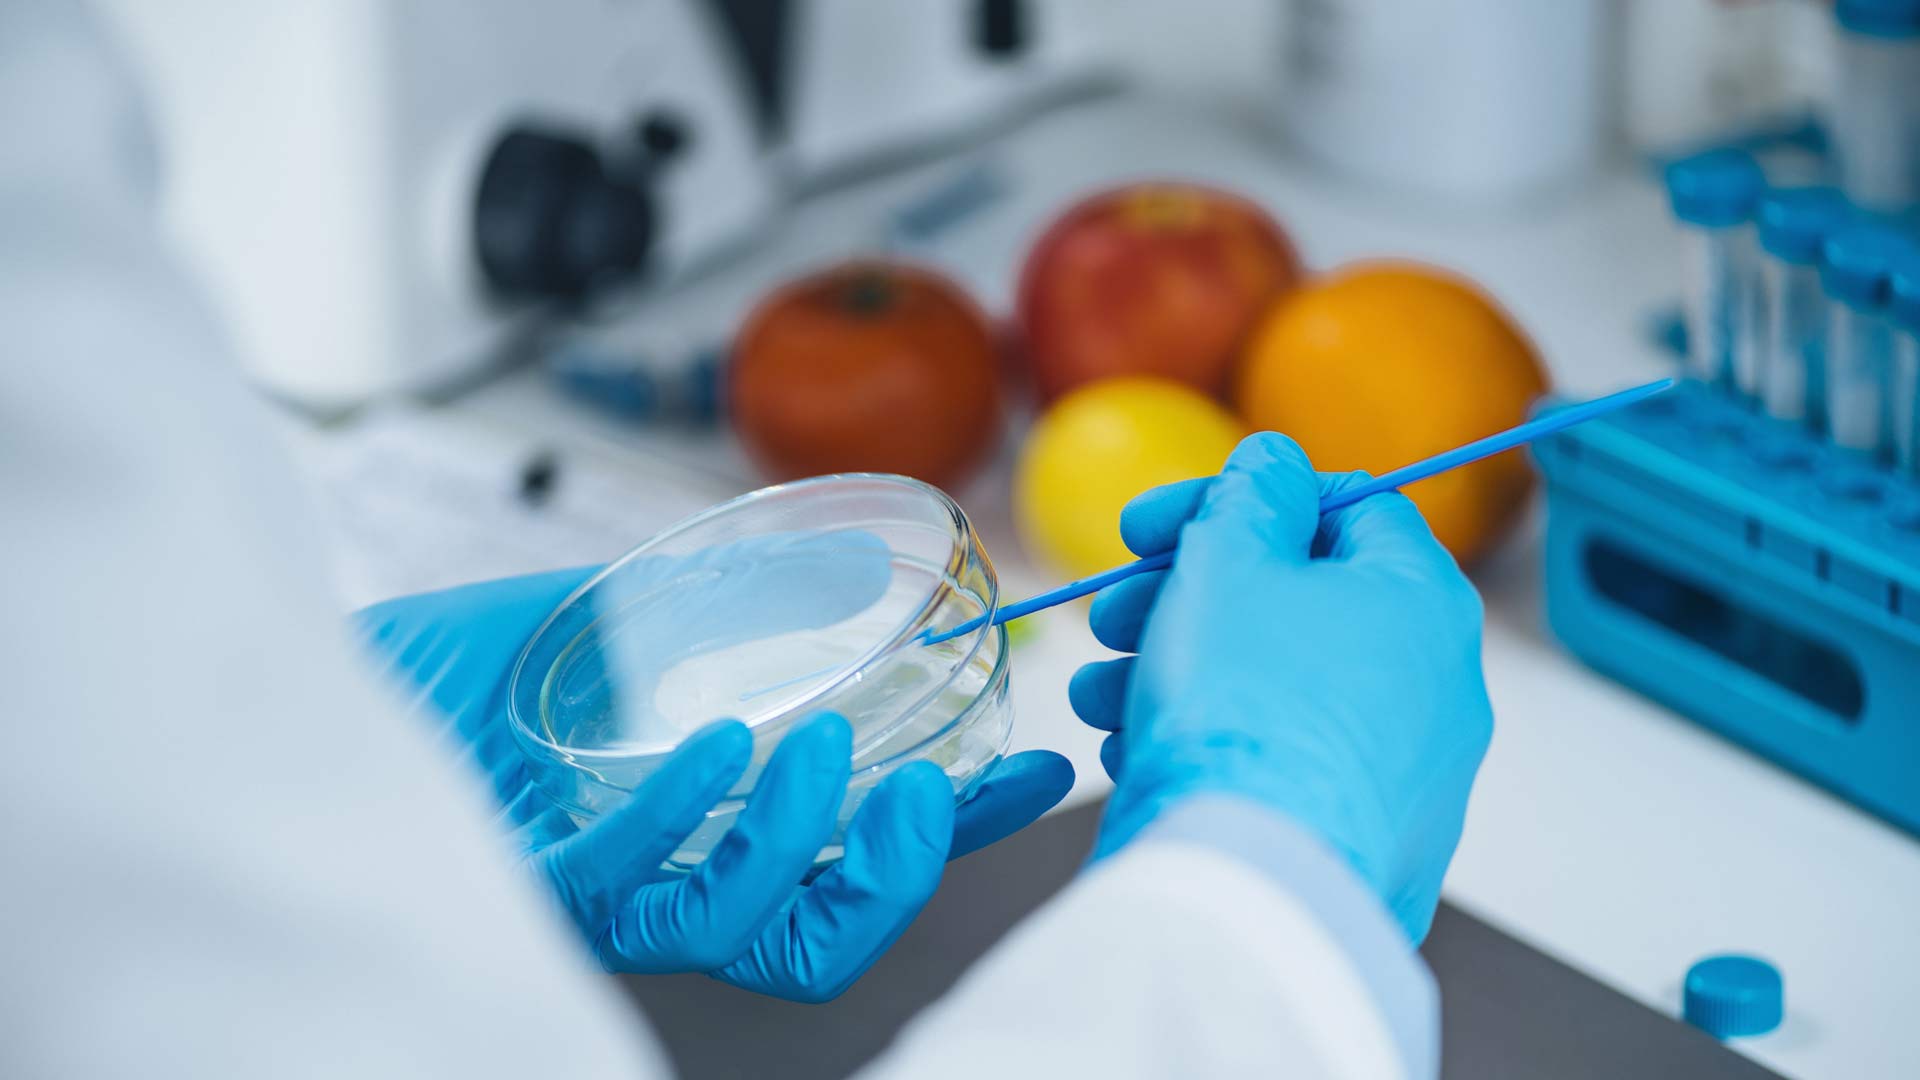 How to Market Analytical Instrumentation to Food Safety Scientists